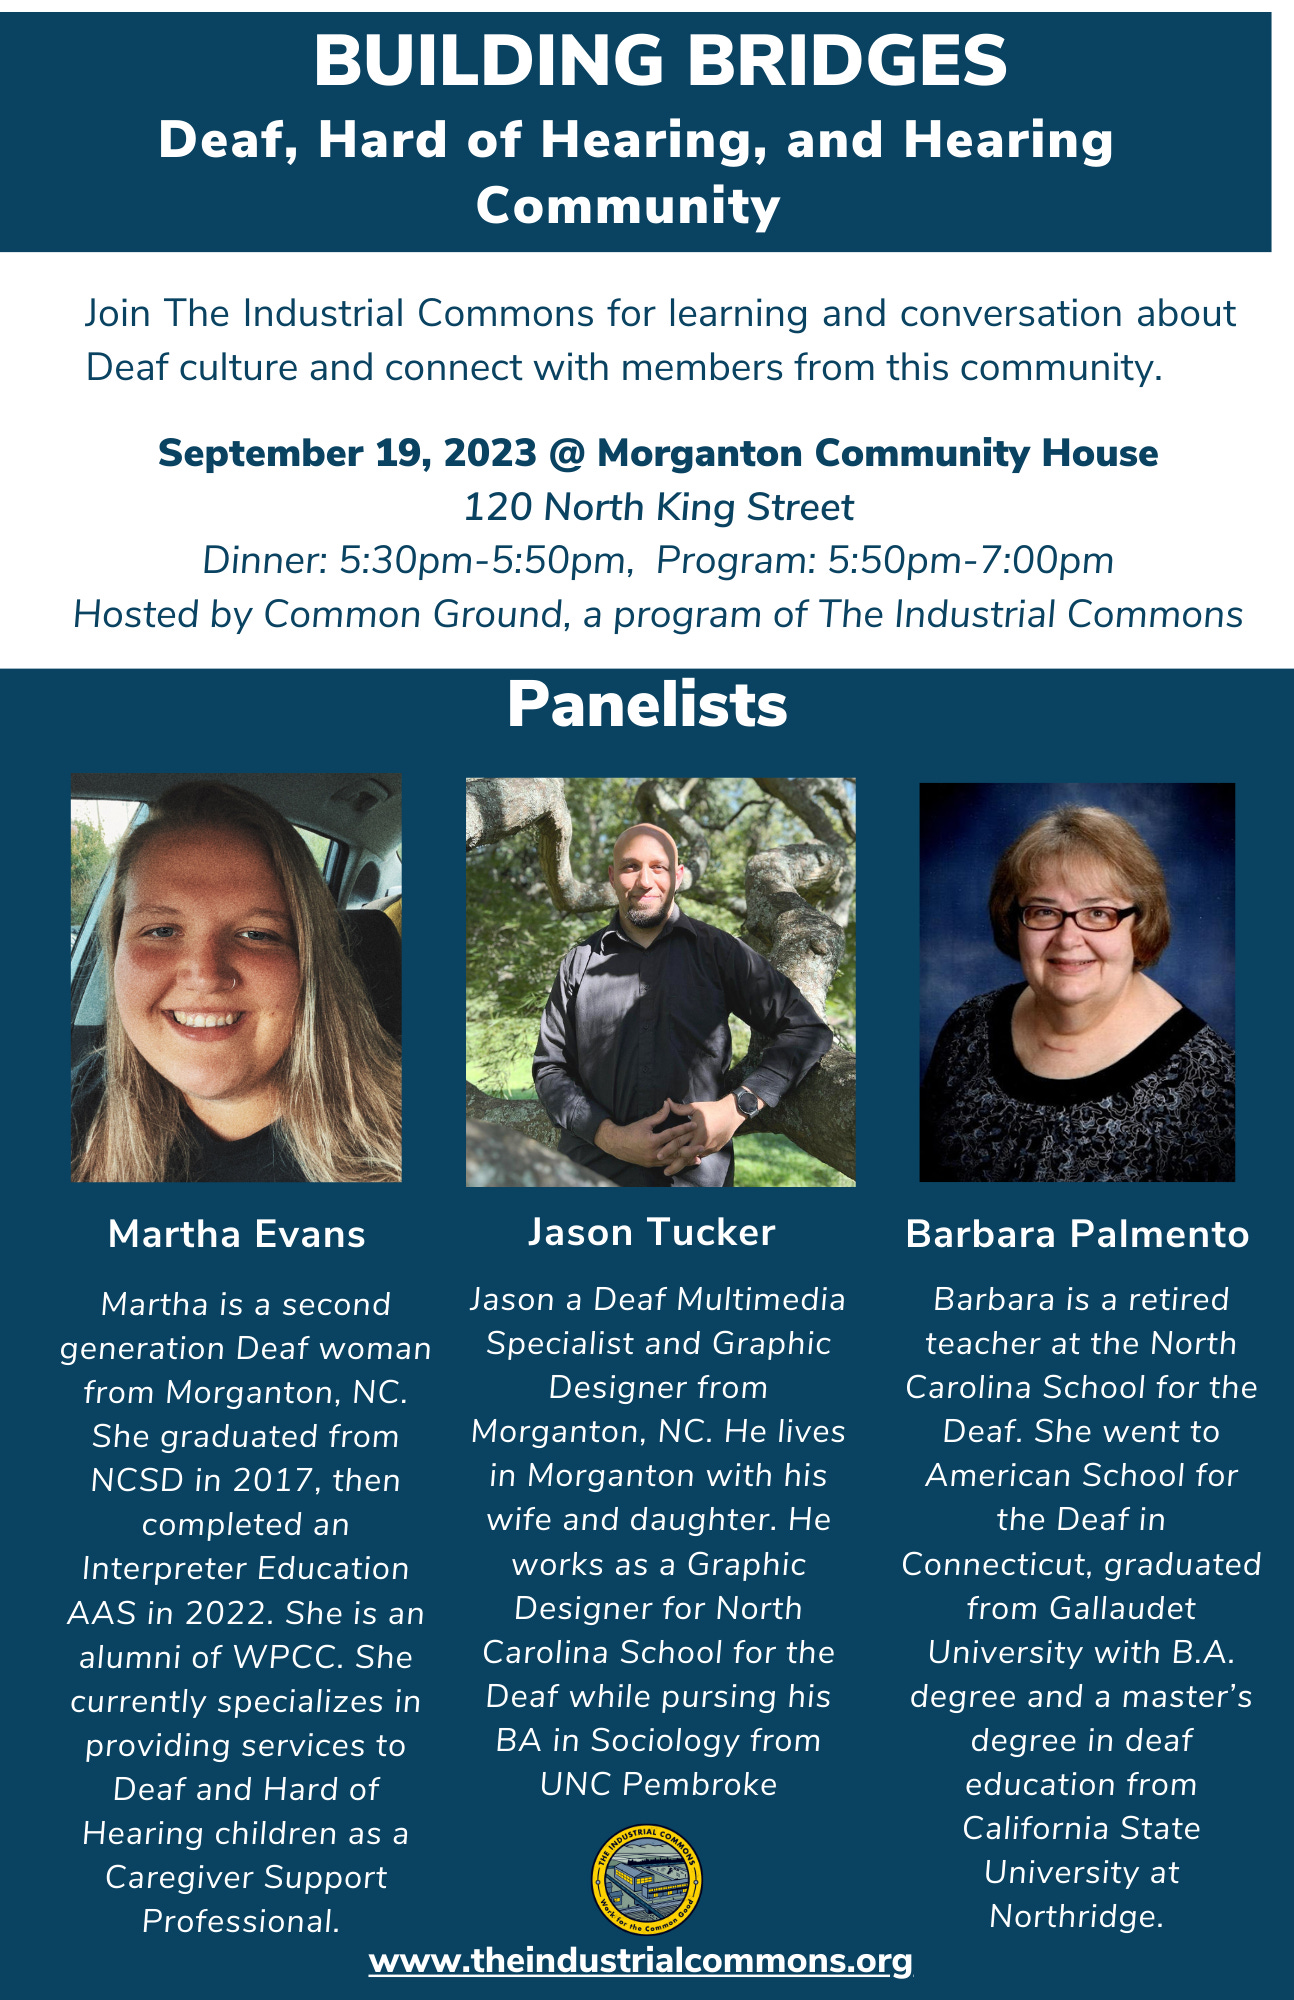 A flyer for the program with text "Building Bridges: Deaf, Hard of Hearing, and Hearing Community RSVP Join us for our next Common Ground event on Building Bridges: Deaf, Hard of Hearing, and Hearing Community. This event aims to provide an initial exploration of Deaf culture, facilitate connections, and encourage the sharing of personal experiences.  Location: Morganton Community House, 120 N King St., Morganton, NC 28655  Date/Time: September 19, 2023  Dinner @ 5:30PM-5:50PM  Program @ 5:50PM-7:00PM  We will have two sign language interpreters present. If you have any questions or need other specific accommodations, please contact Tea Yang at tea@theindustrialcommons.org.   Hosted by Common Ground, a program of The Industrial Commons."